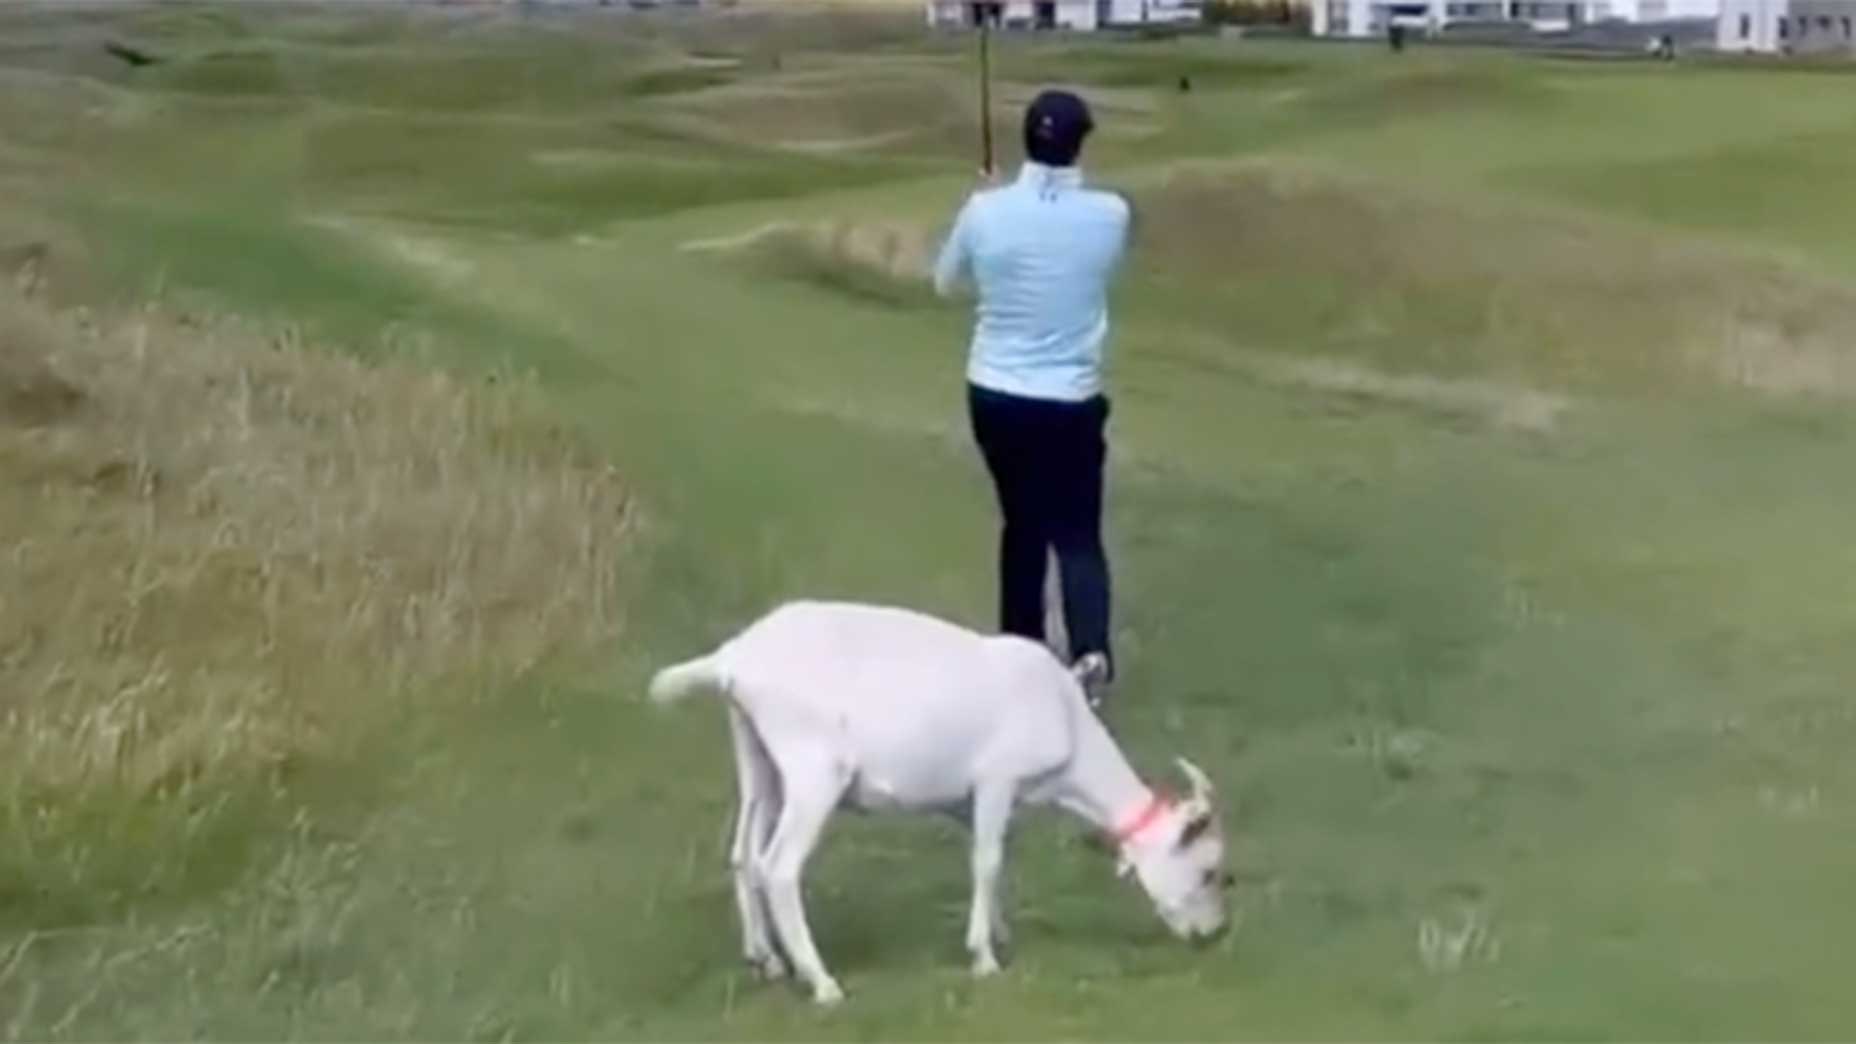 Jordan Spieth hits with a goat behind him.